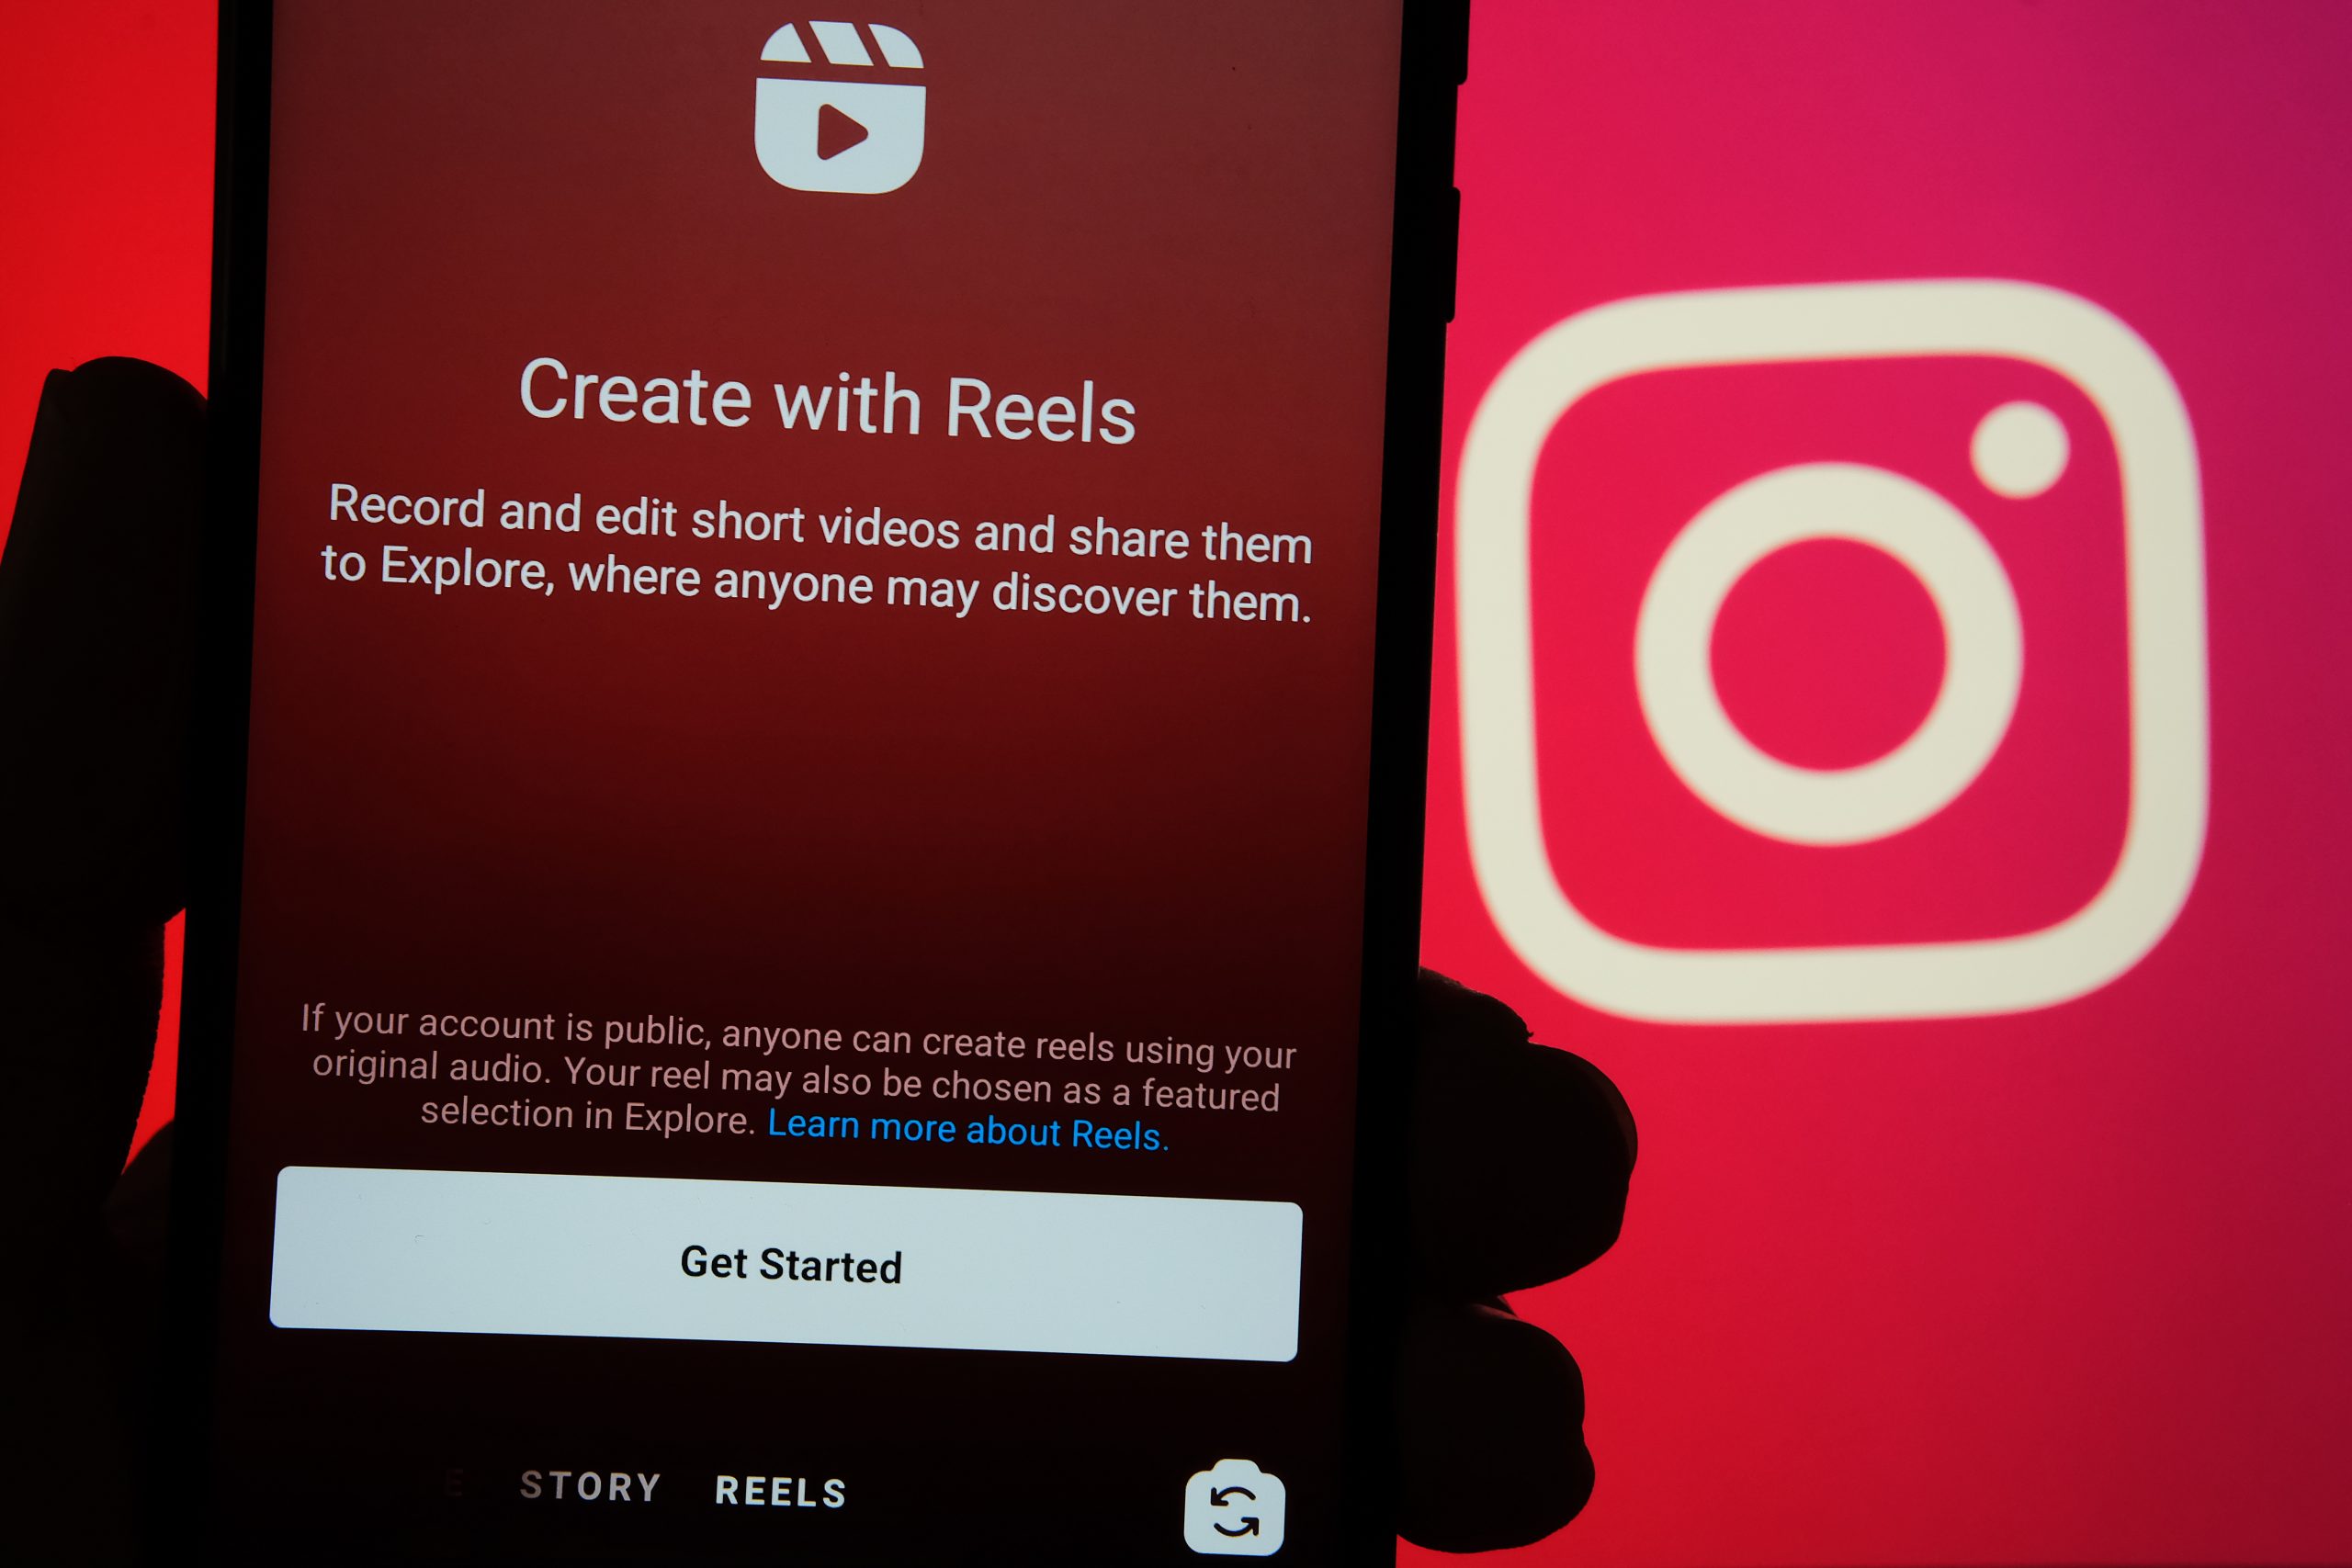 Instagram Expands Reels to 60 Seconds